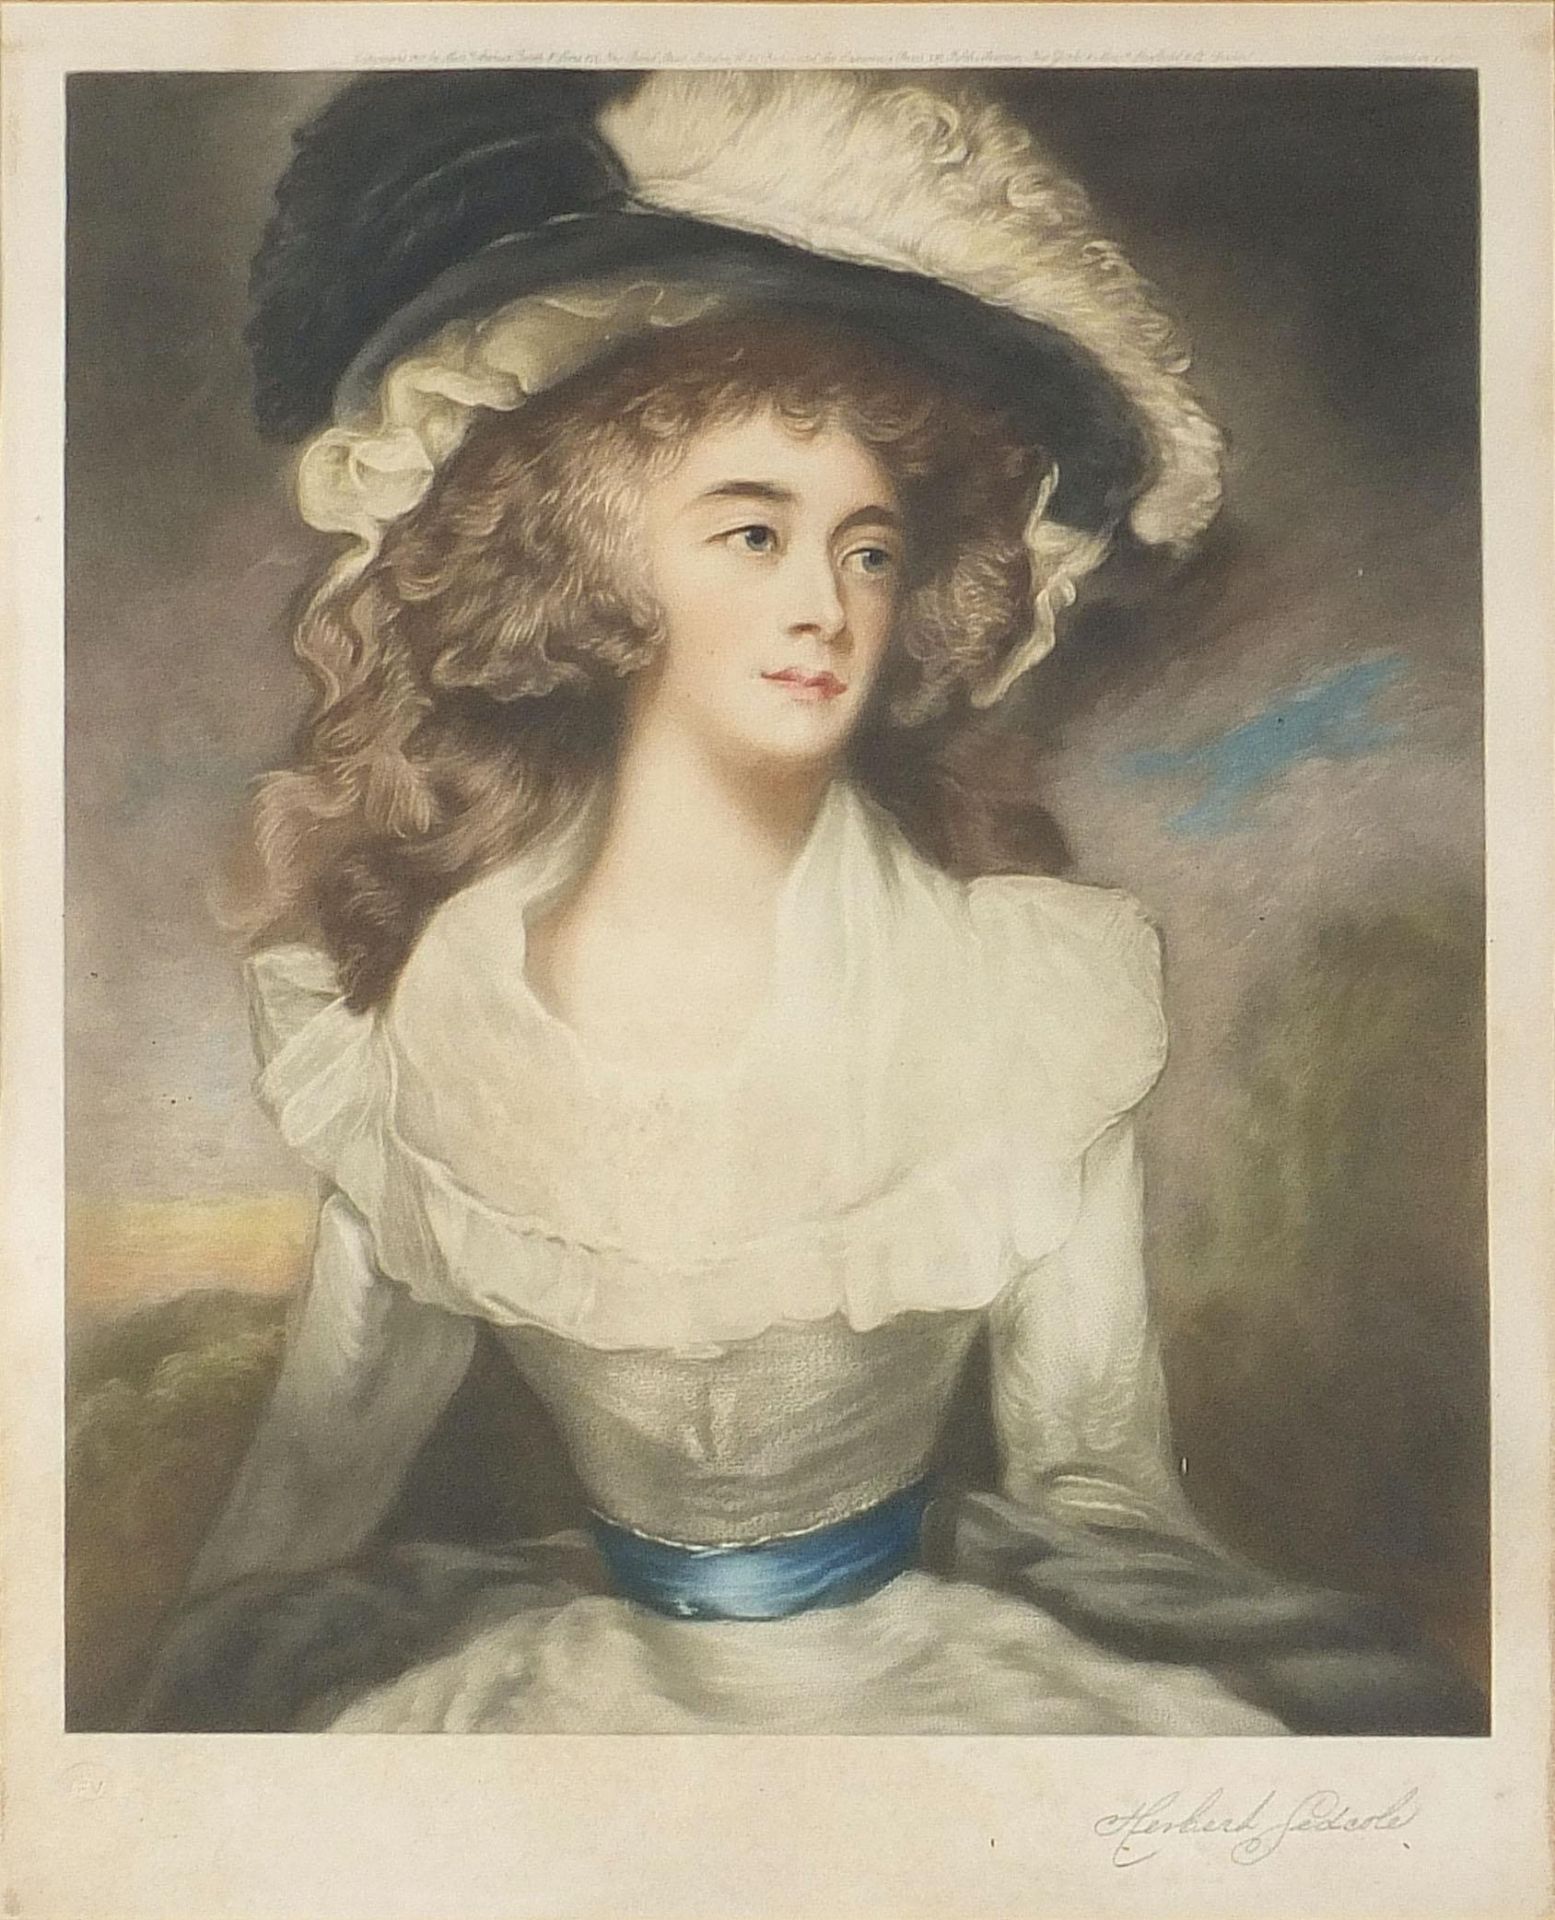 Herbert Sedcote - Portrait of a lady wearing a hat, pencil signed print in colour, embossed blind